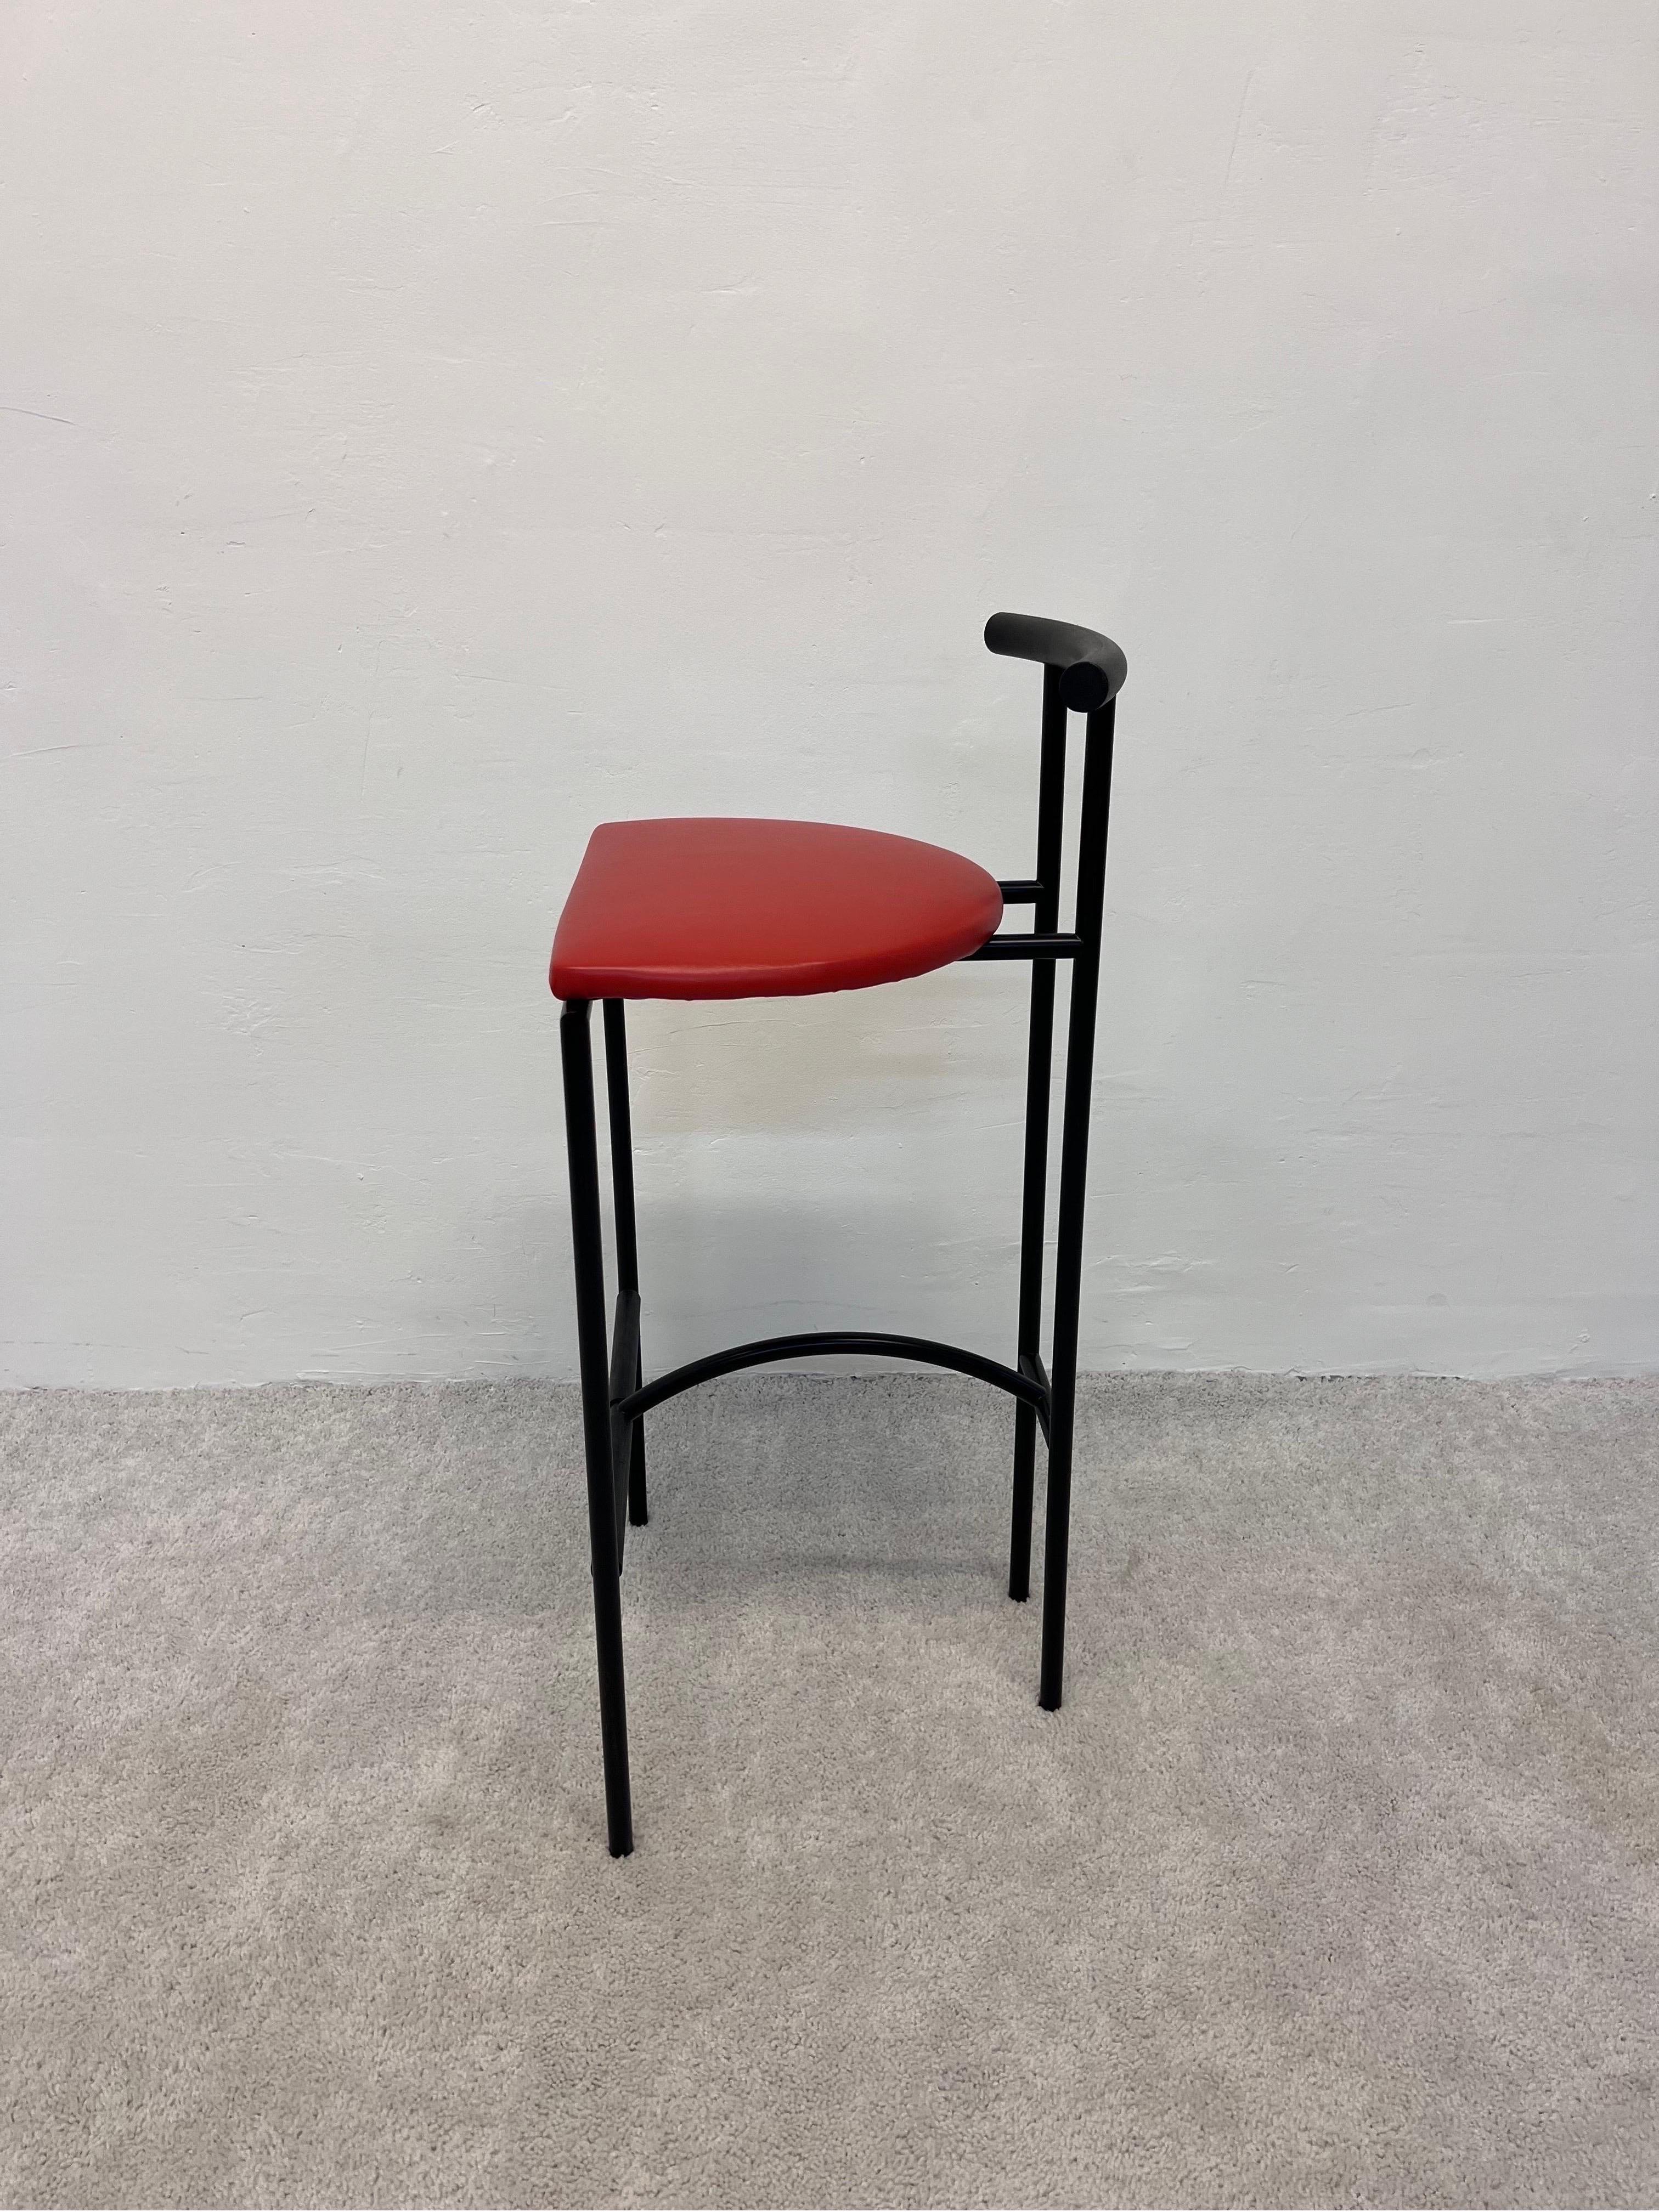 Rodney Kinsman Tokyo Stool for Bieffelplast, Italy 1980s In Good Condition For Sale In Miami, FL